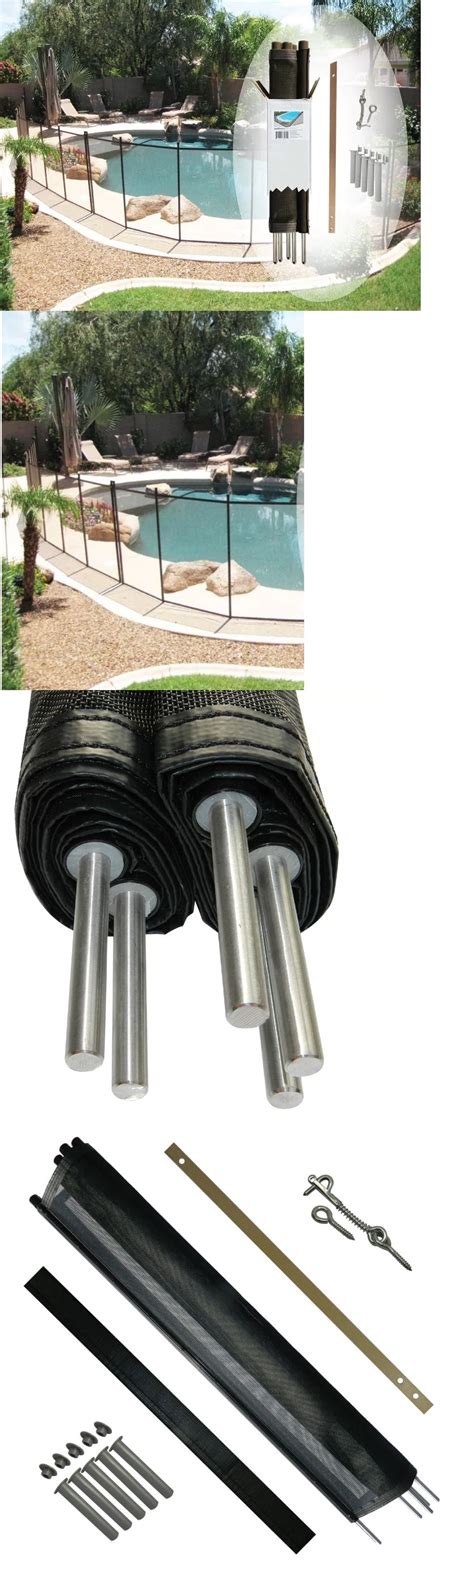 Free shipping site to store. Pool Fences 167851: Swimming Pool Safety Fence In Ground 4 X 12 Diy Panel Black Sturdy Mesh New ...